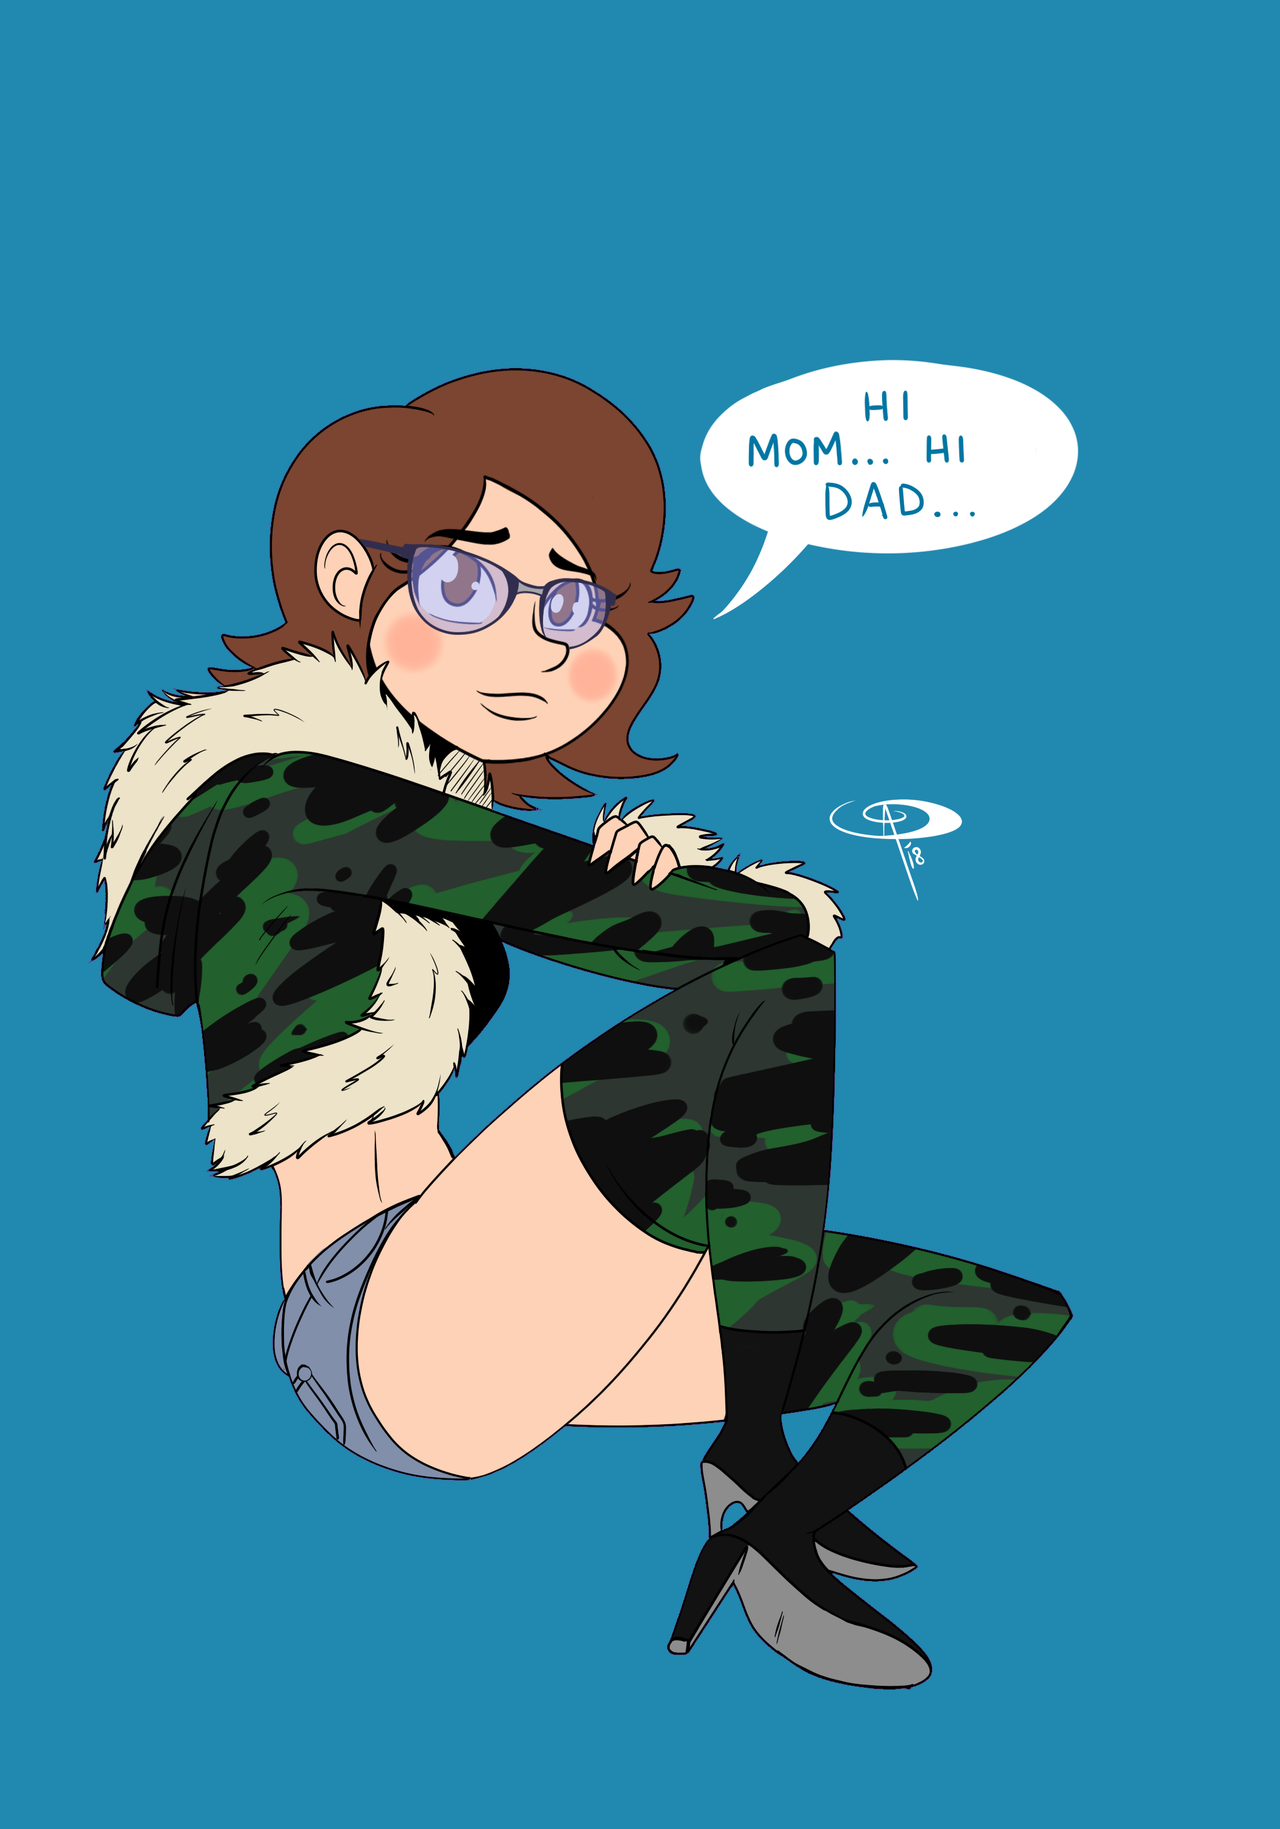 chillguydraws: SFW Set for Patreon Sketches. NSFW on my smut blog.   ________________________________________________Support